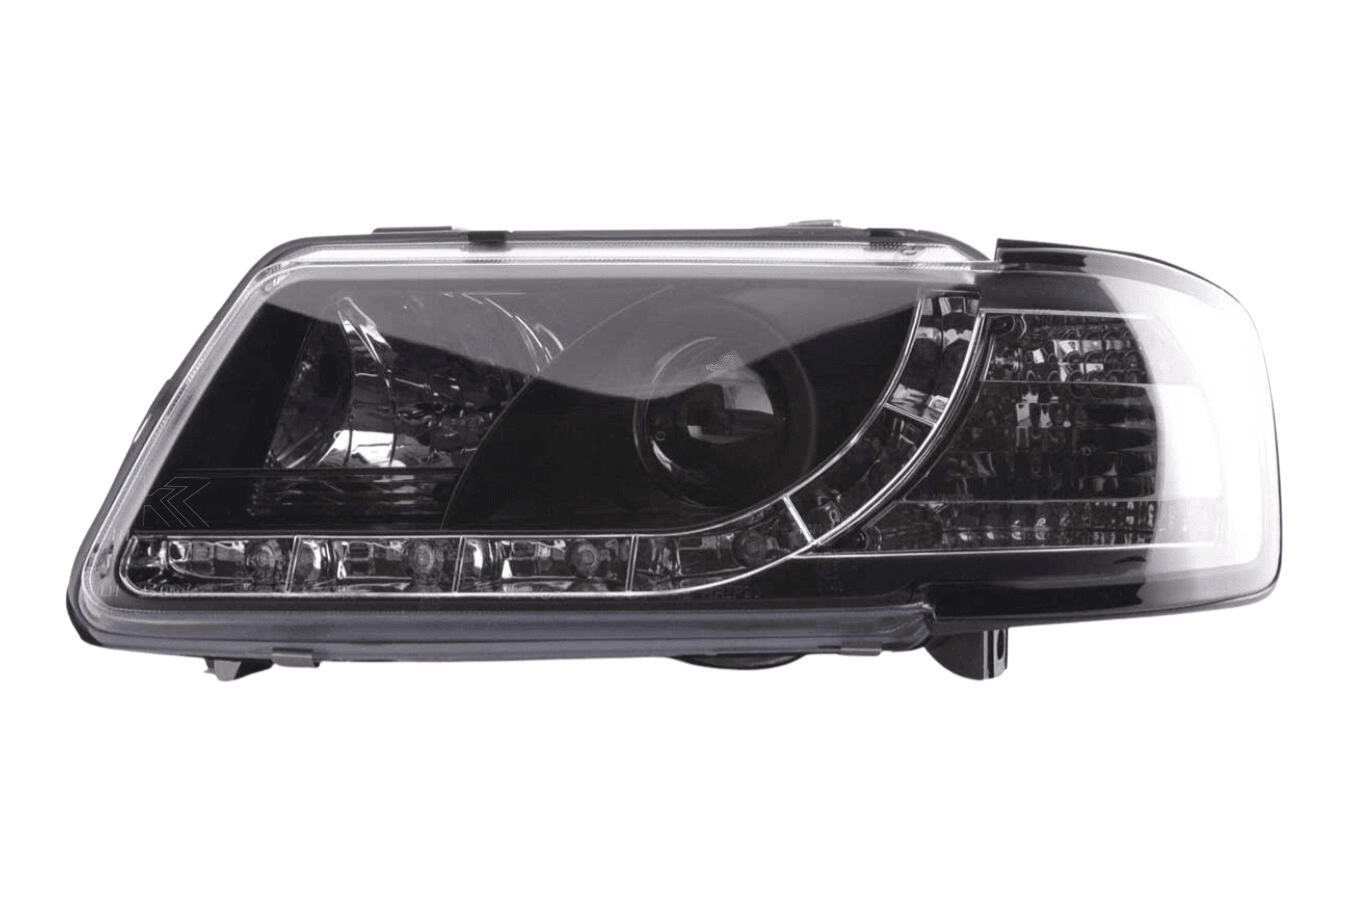 Audi A3 (8L) Black LED Headlights with Daytime Running Lights (1996-2000) - K2 Industries